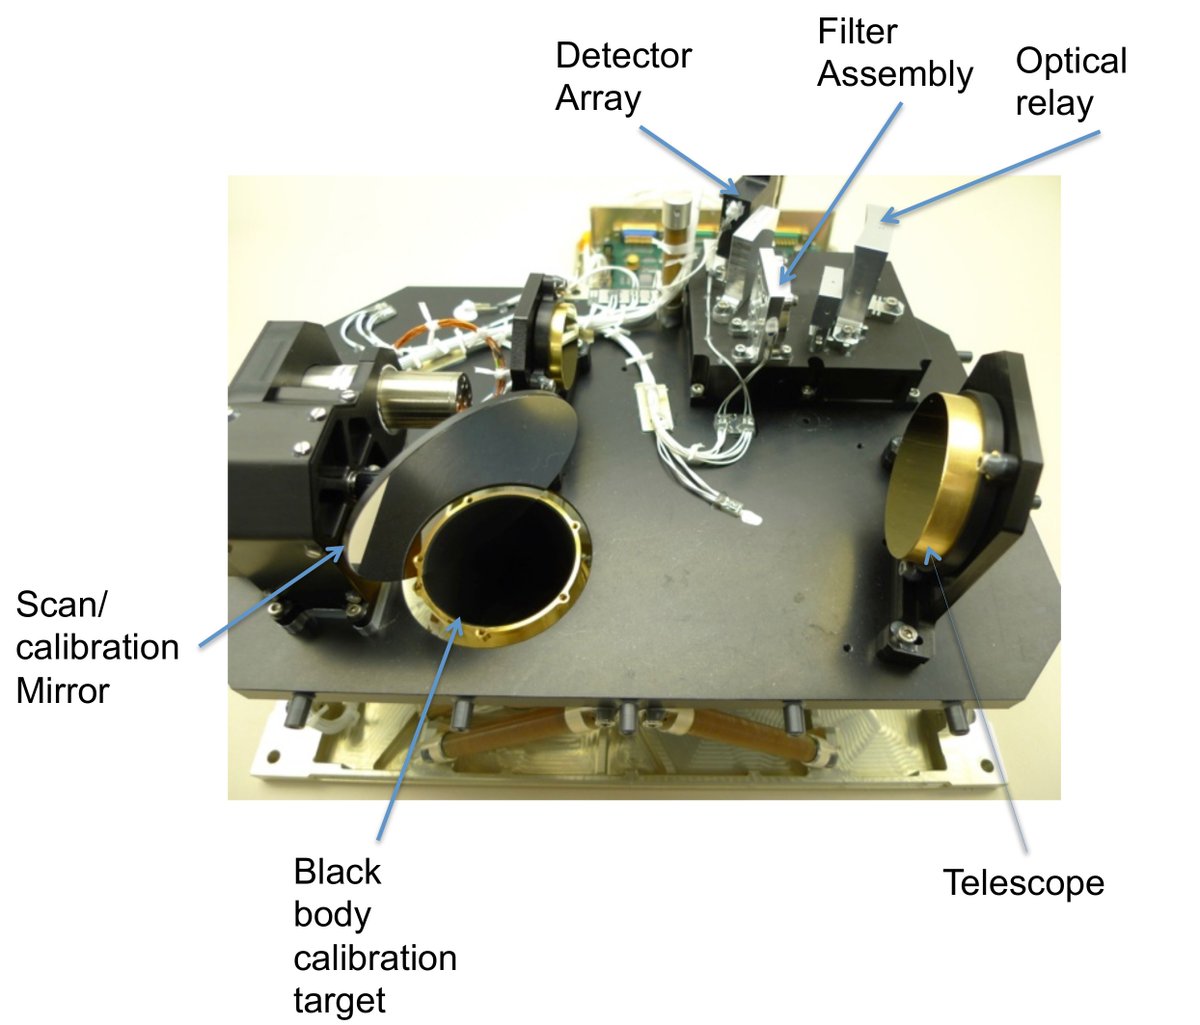 2014: not forgetting the Earth: Oxford's innovative Compact Modular Sounder launches onboard the British TechDemoSat-1 satellite, paving the way to a new wave of cubesat-sized instrumentation.10/